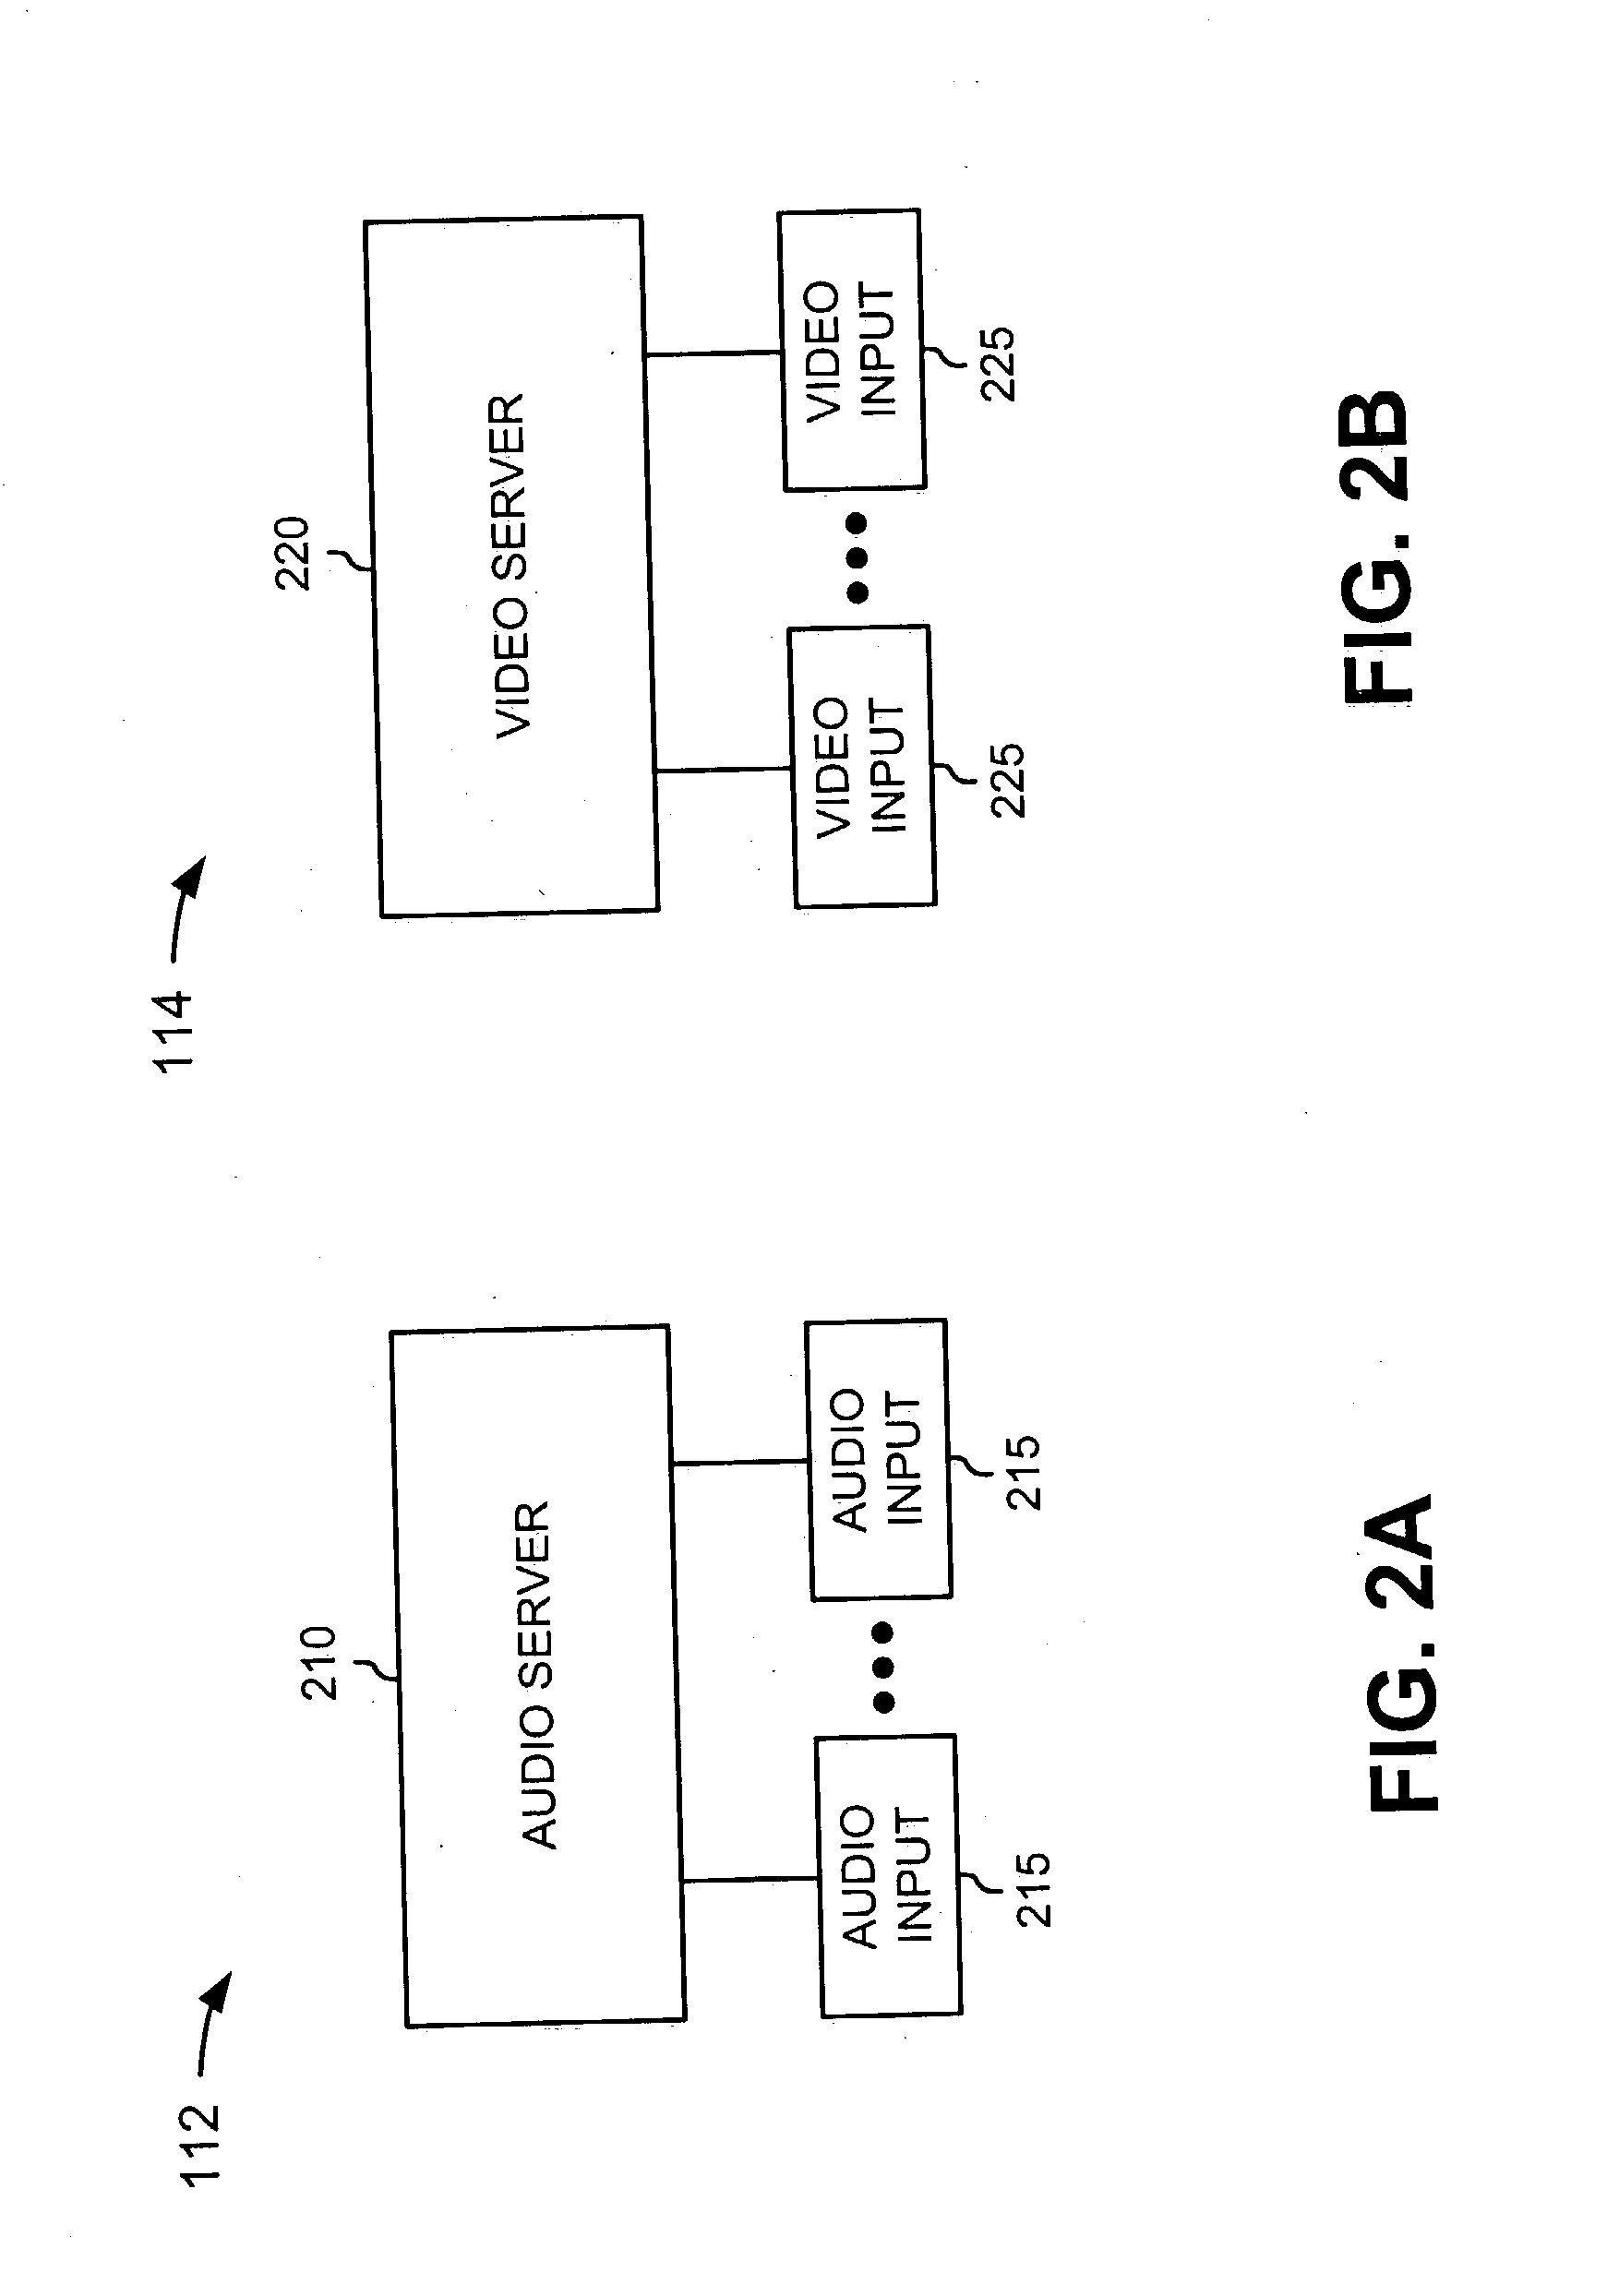 Systems and methods for providing acoustic classification